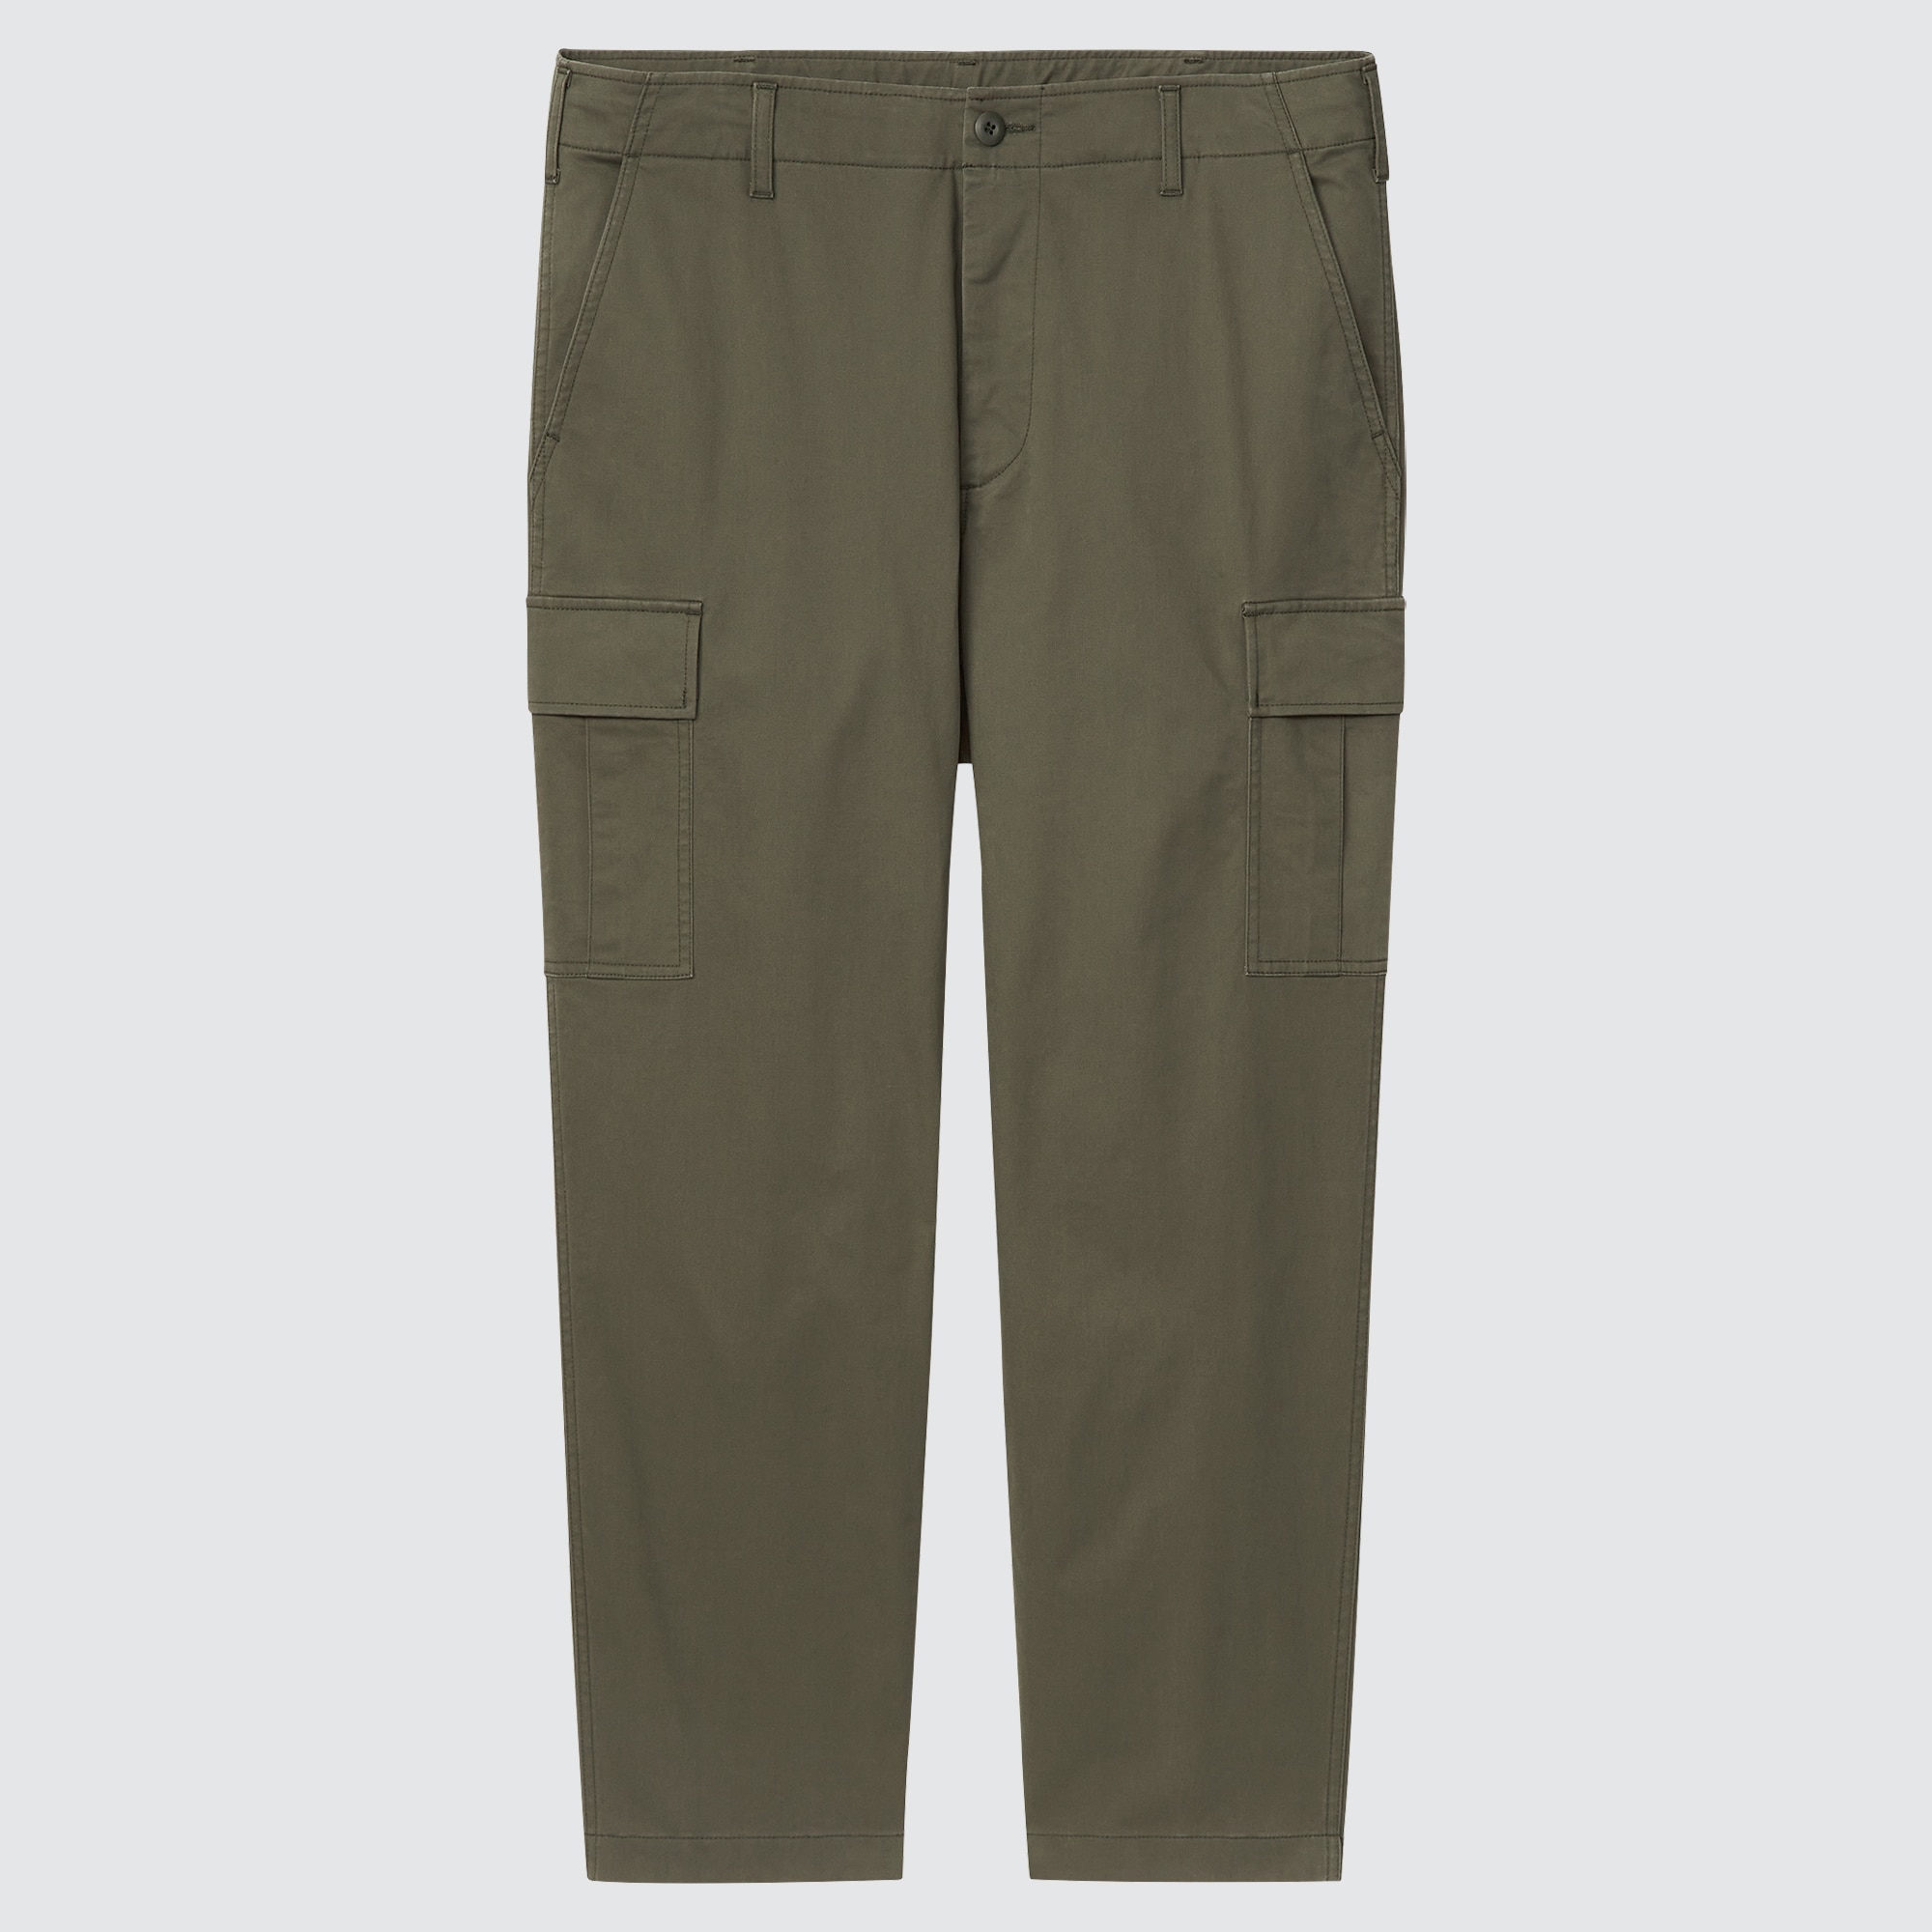 MENS UTILITY WORK PANTS CARGO  UNIQLO VN